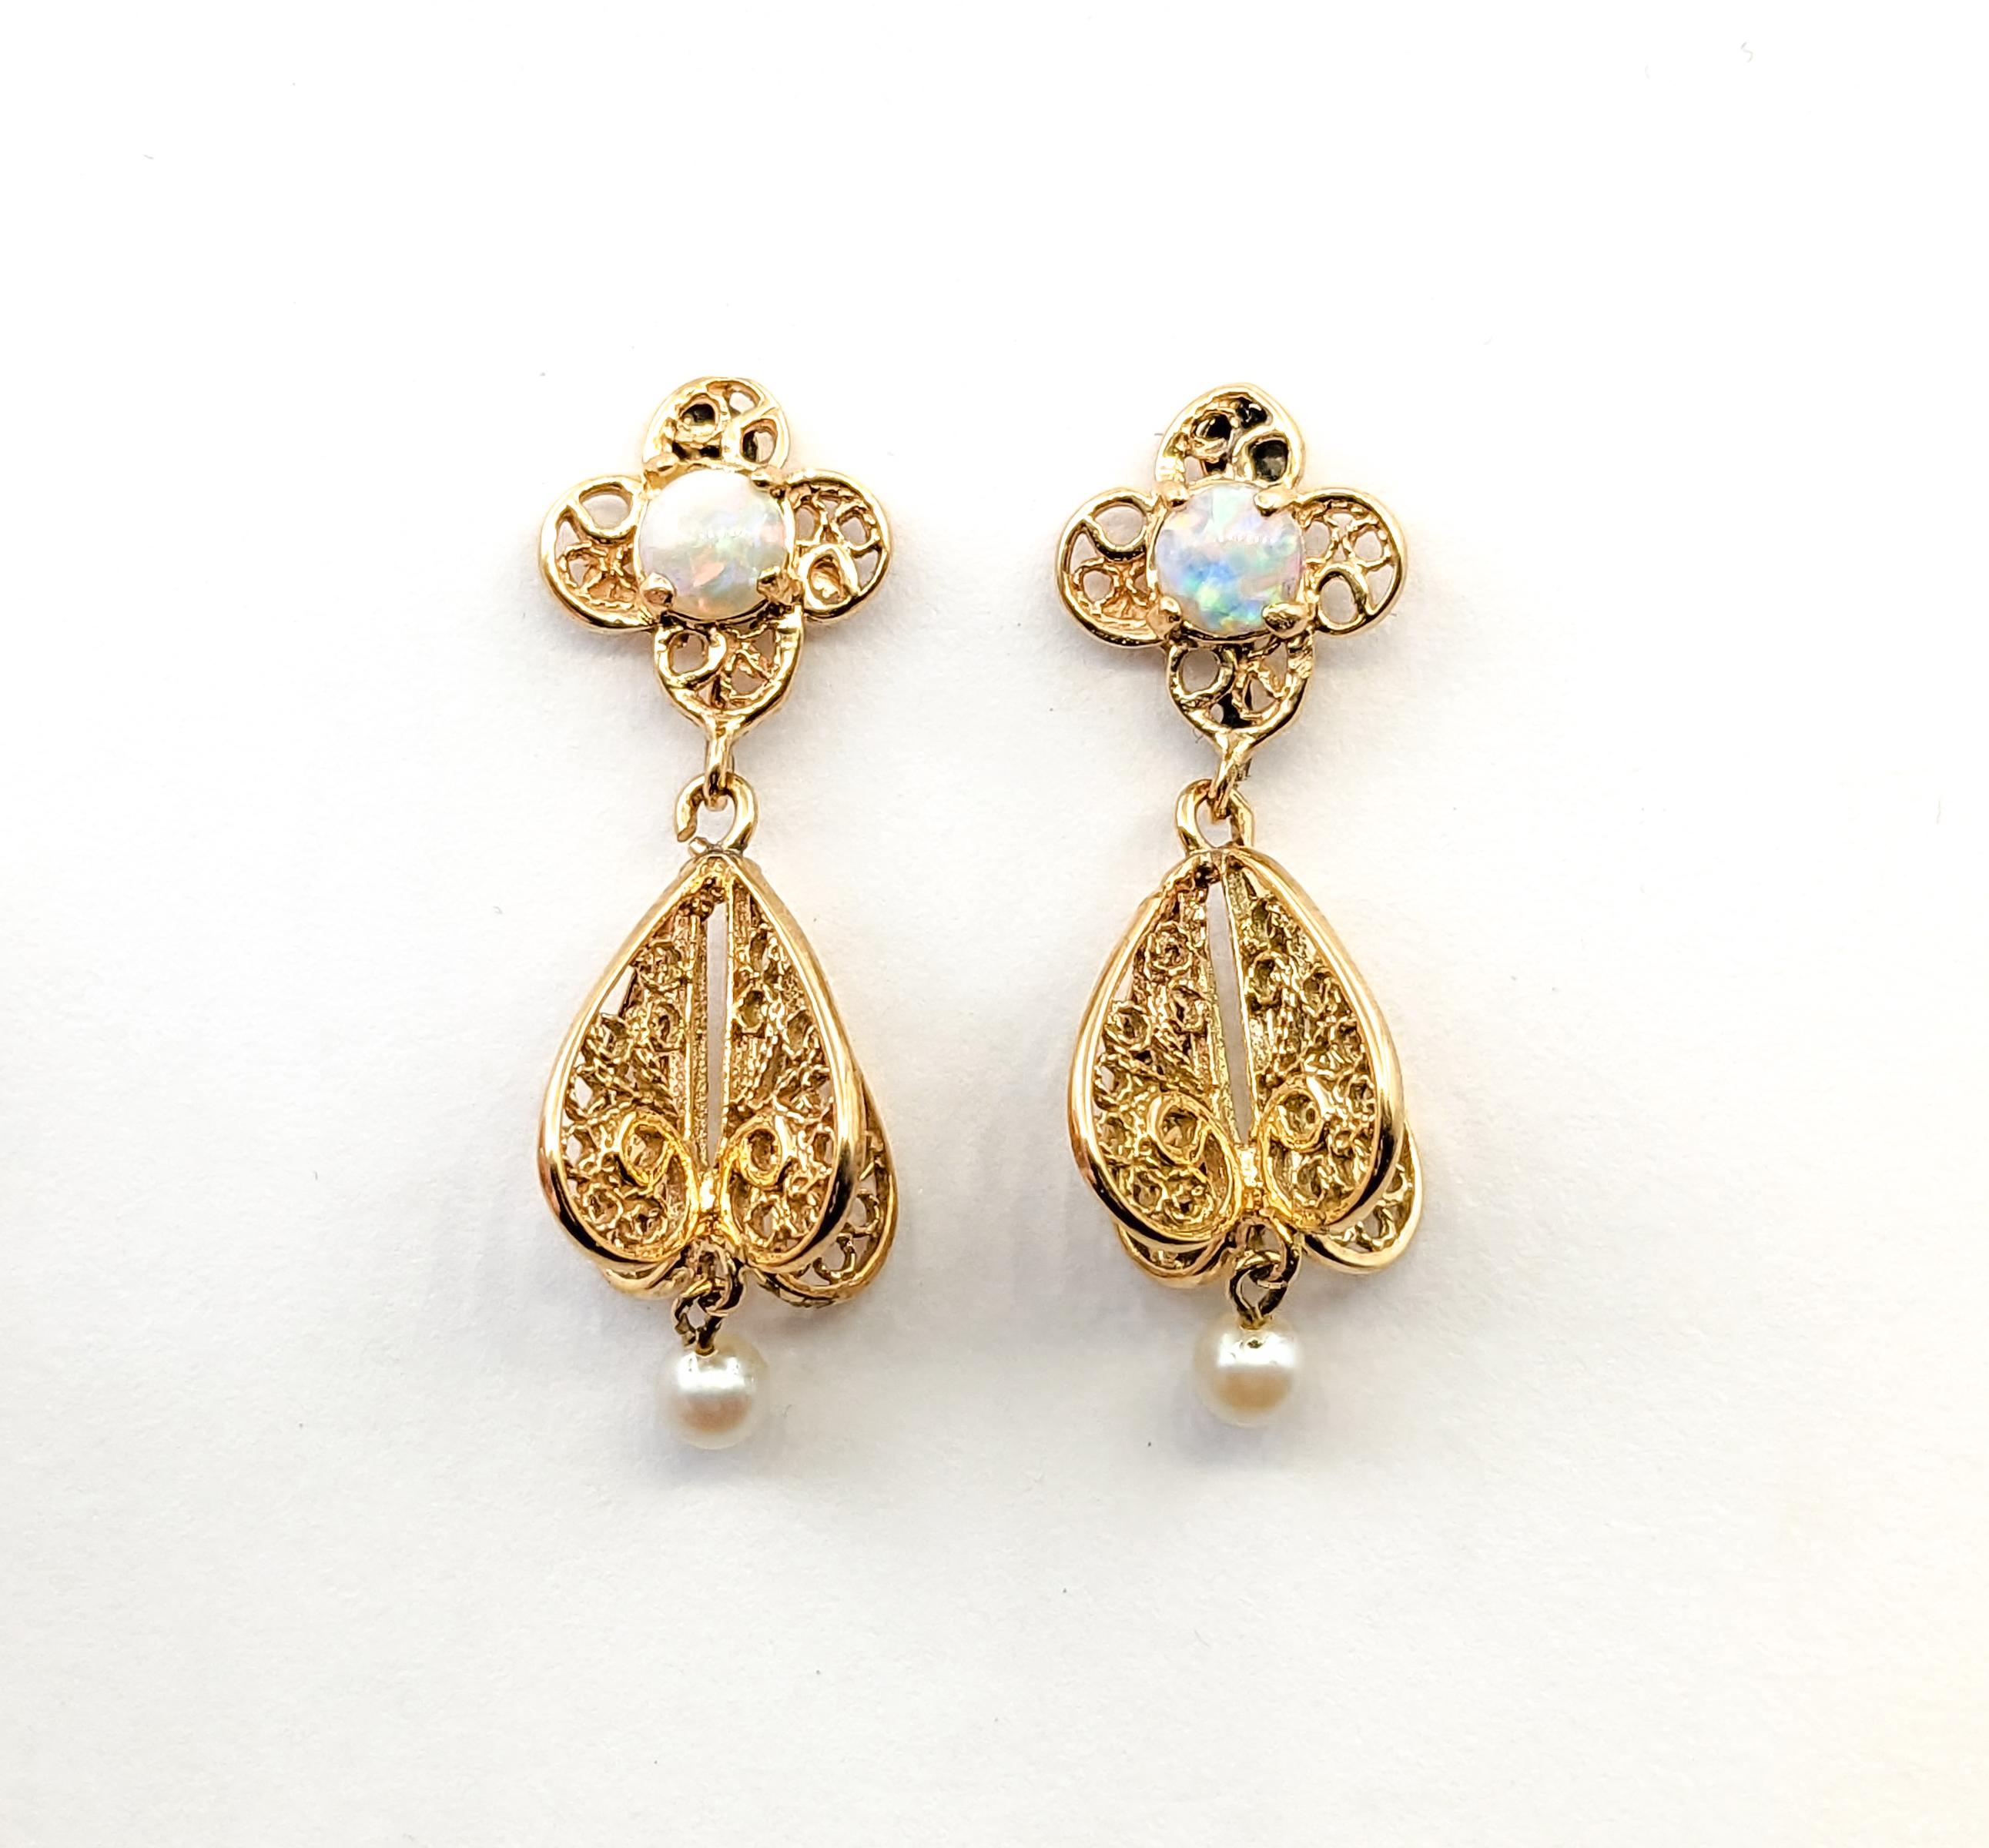 Dangle Vintage 4mm Akoya Pearls & 5mm Australian Opals Earrings In Yellow Gold In Excellent Condition For Sale In Bloomington, MN